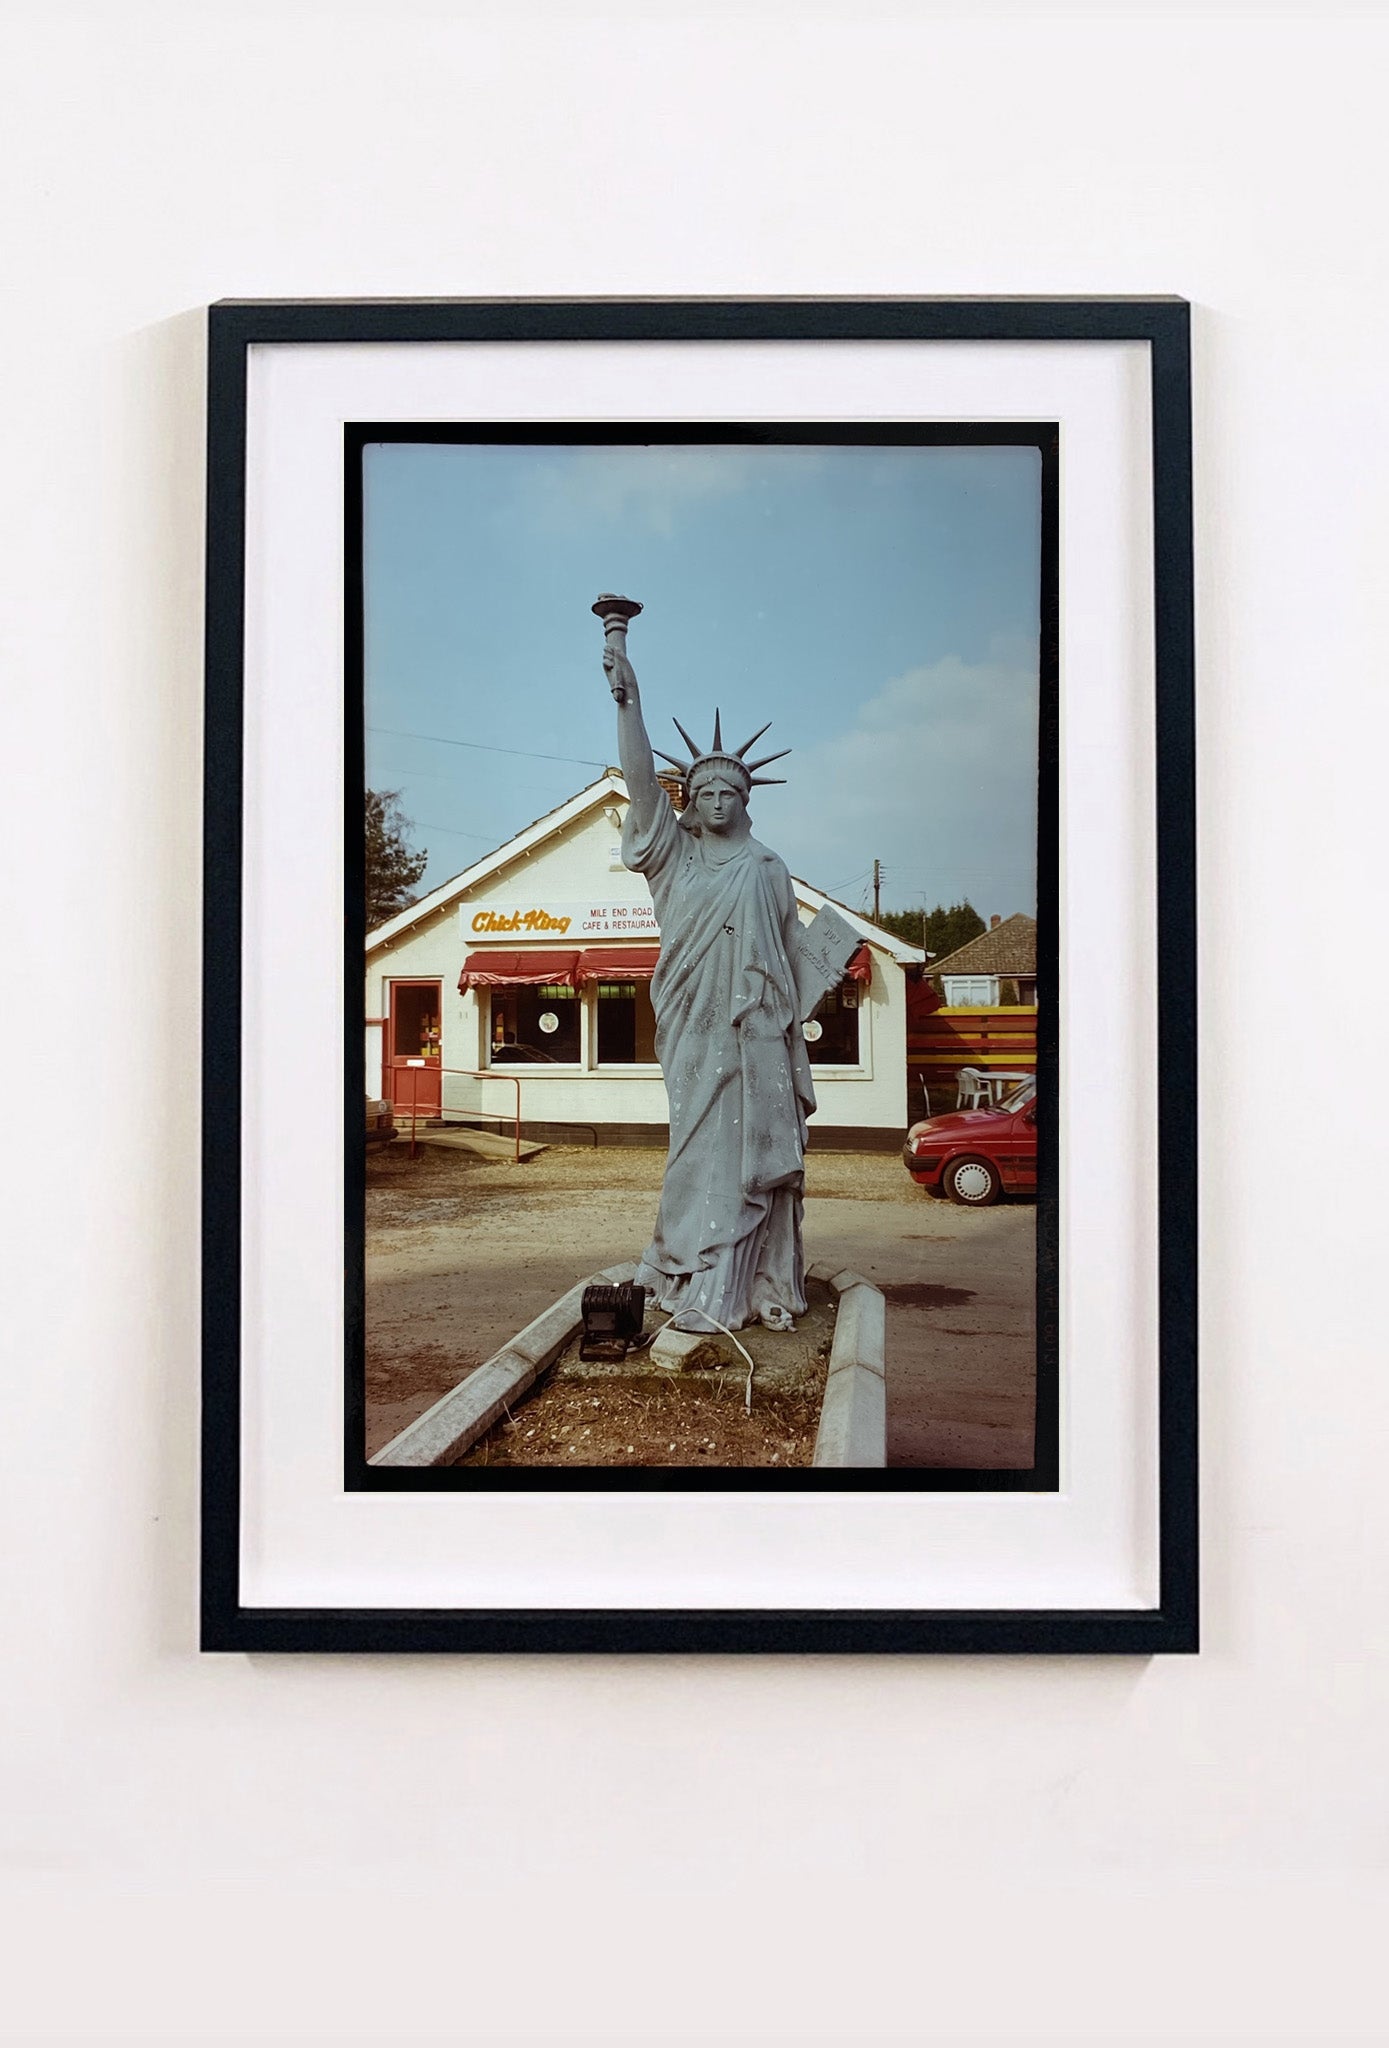 July IV, a statue of Liberty in a rural town on the Suffolk/Norfolk border. I